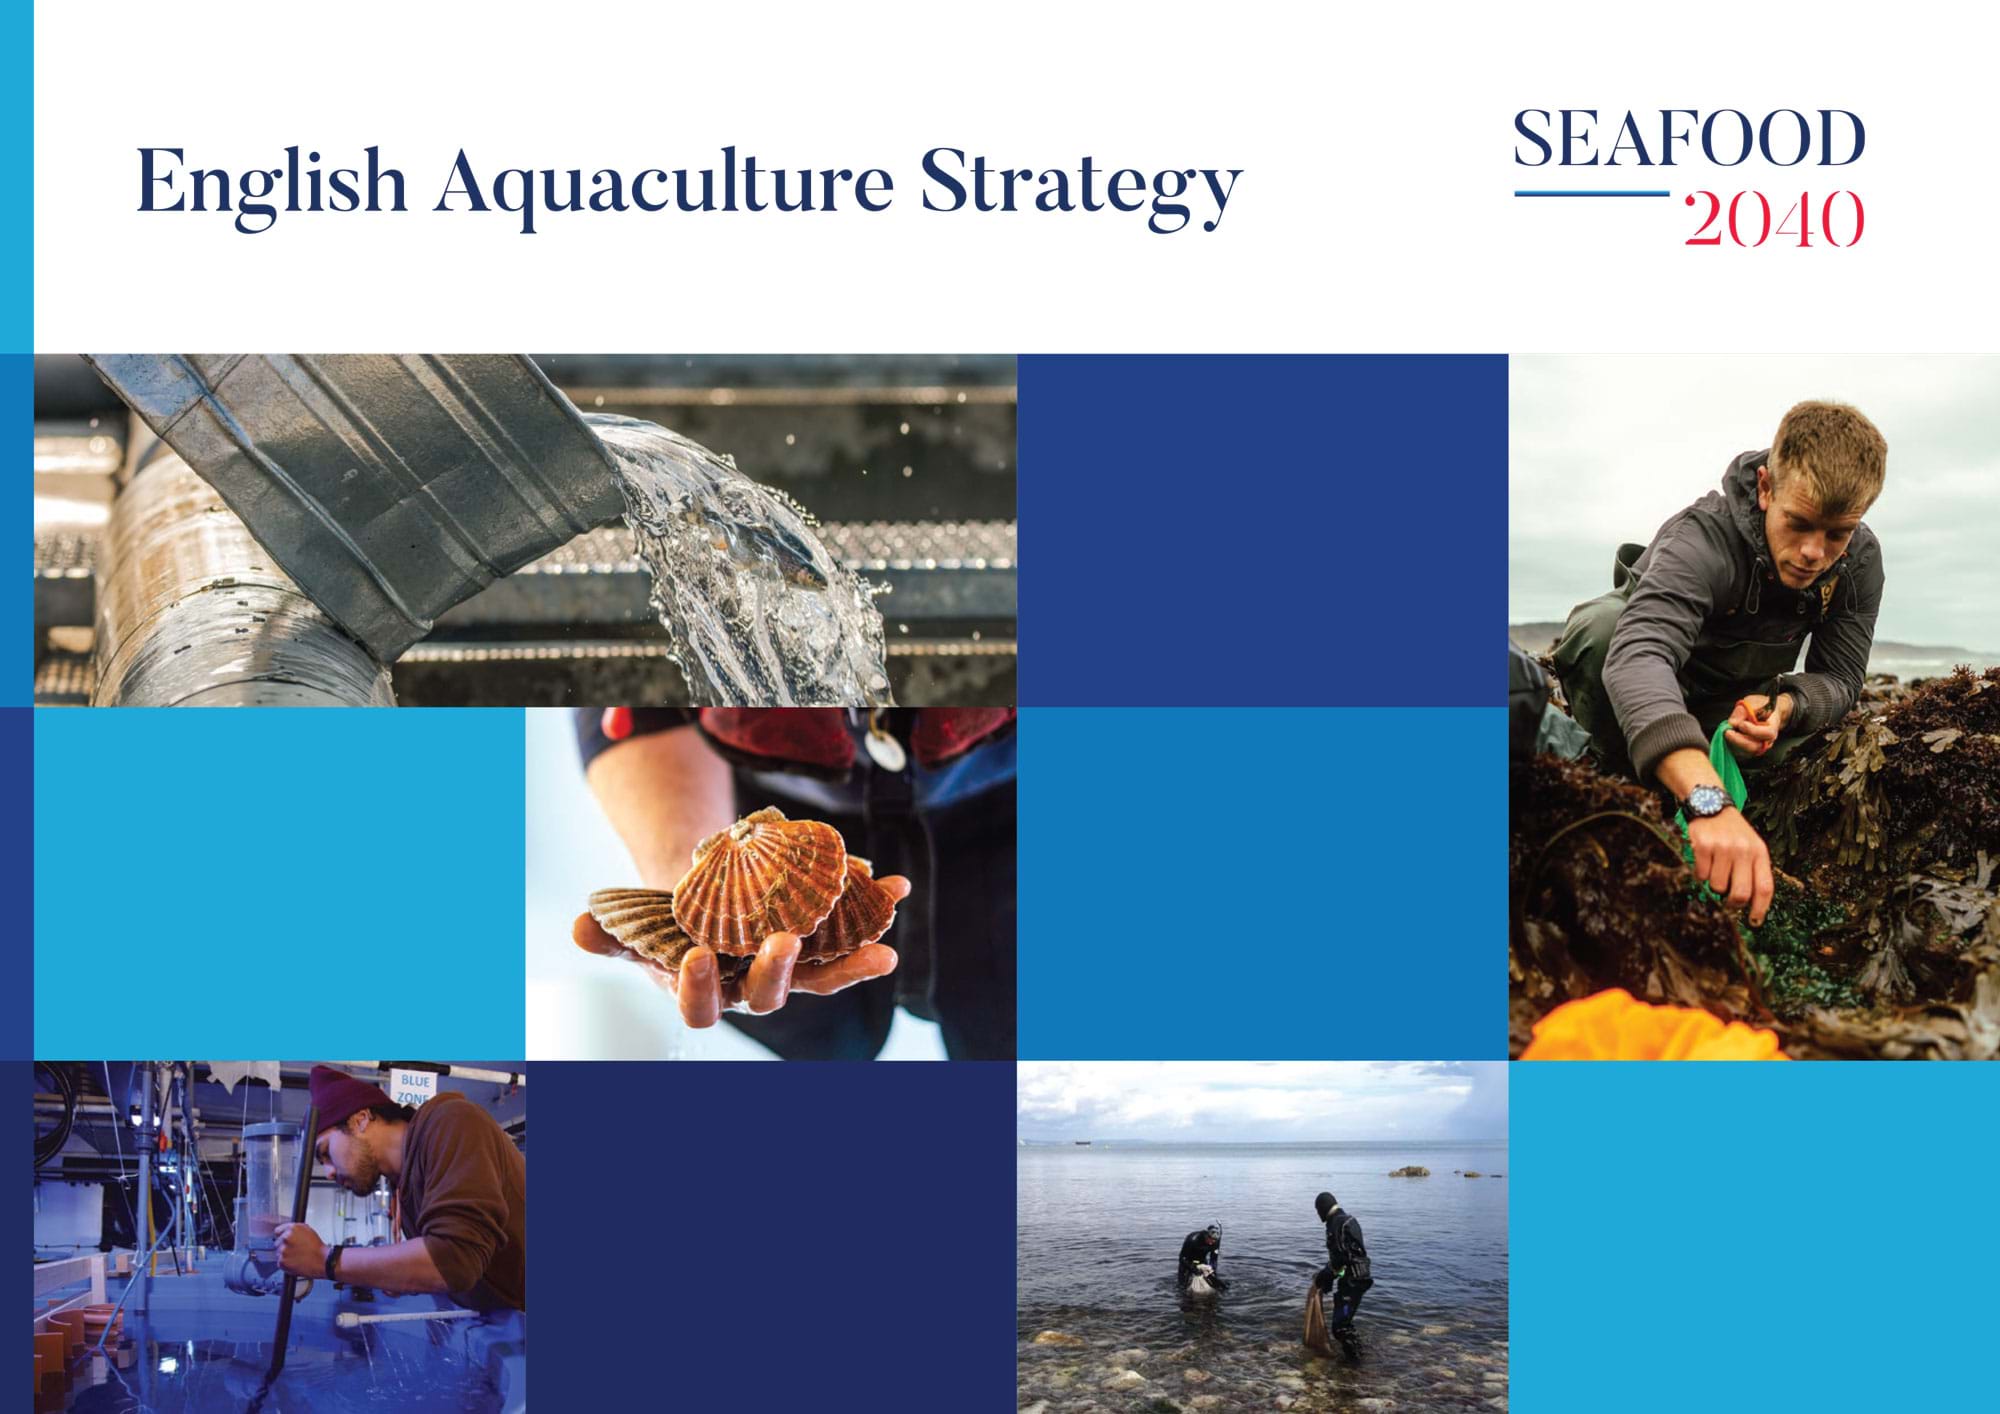 Cover of the English Aquaculture Strategy report by Seafood 2040